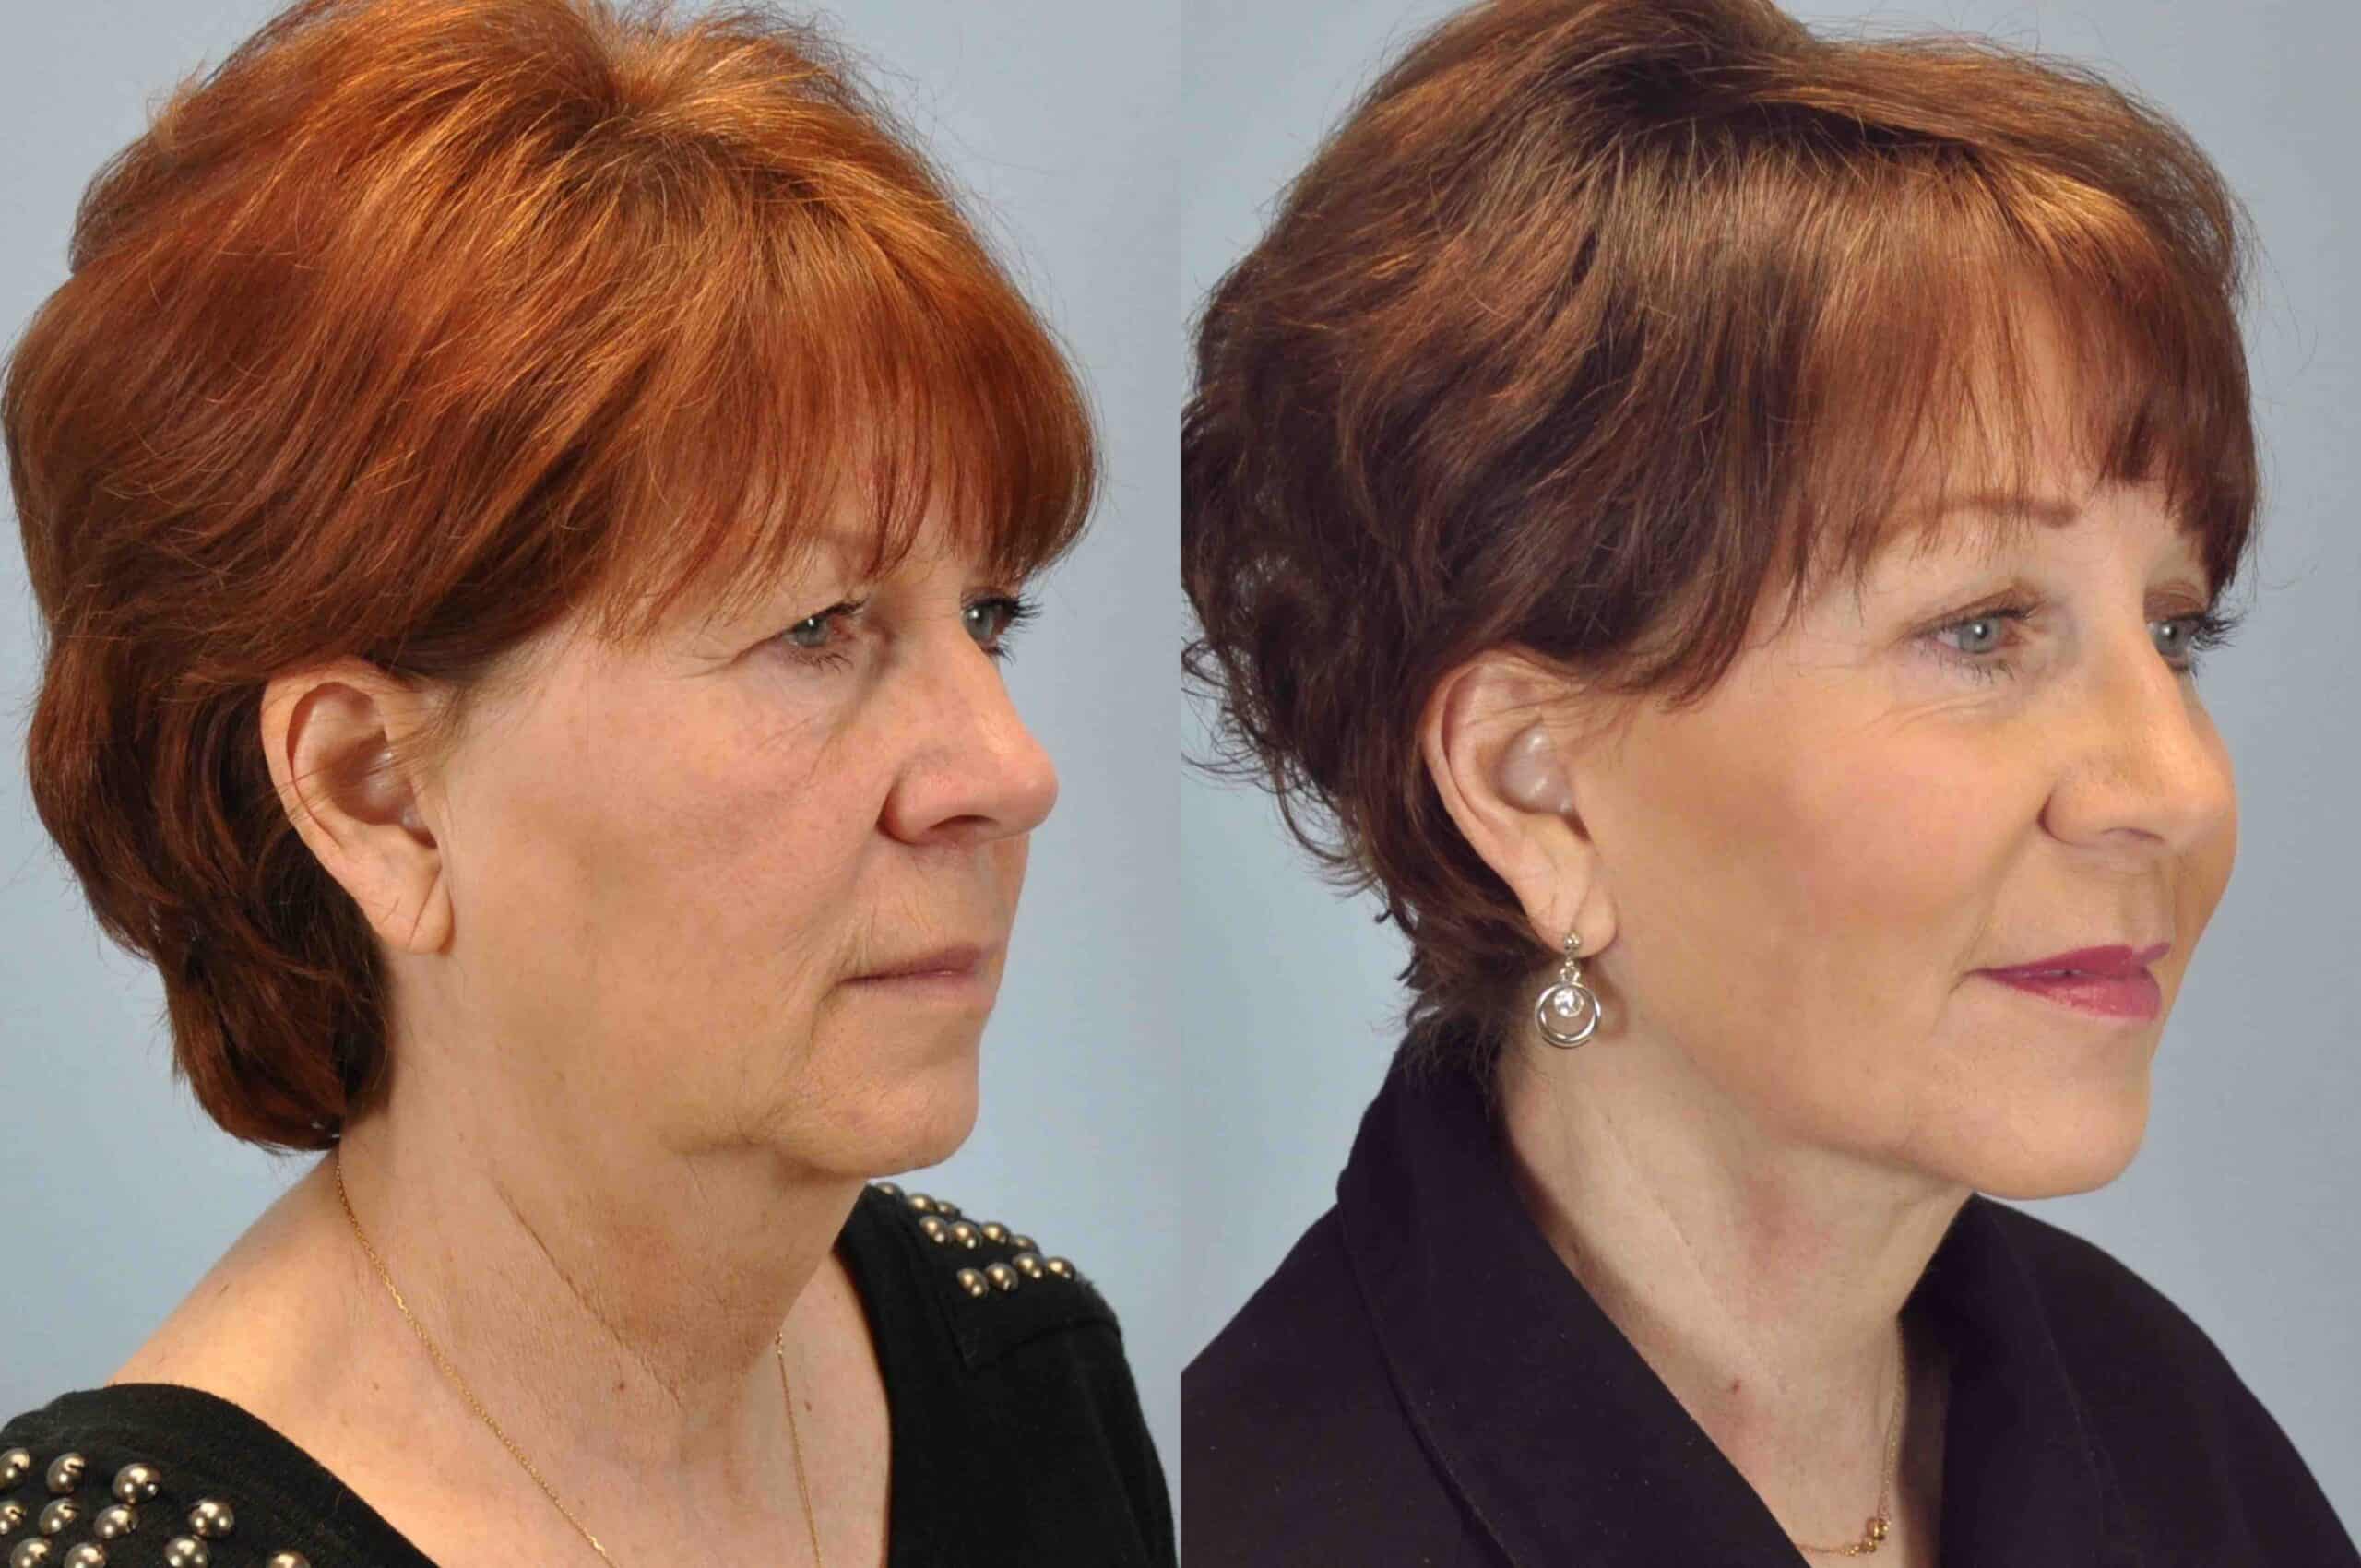 Before and after, patient 1 yr post op from Autologous Fat Transfer Face, Lip Augmentation, Facelift, Necklift, Endo Brow, Lower Blepharoplasty/ Canthopexy procedures performed by Dr. Paul Vanek